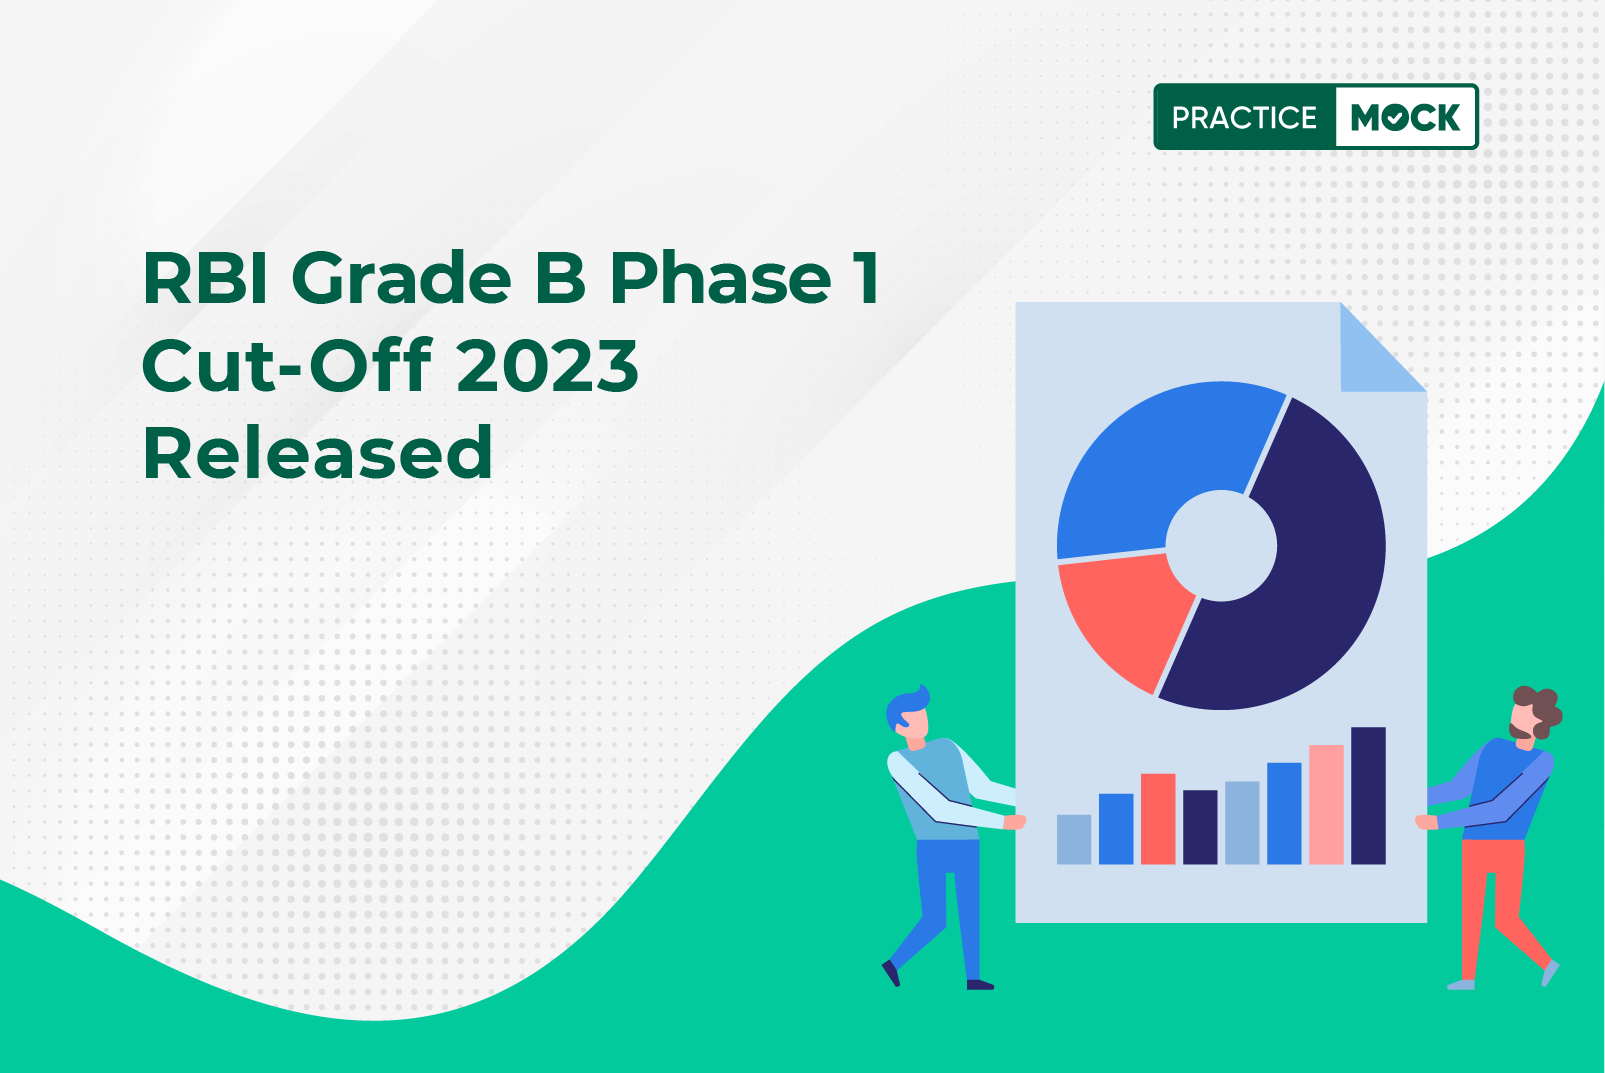 RBI Grade B Cut-Off 2023 Phase 1 Released